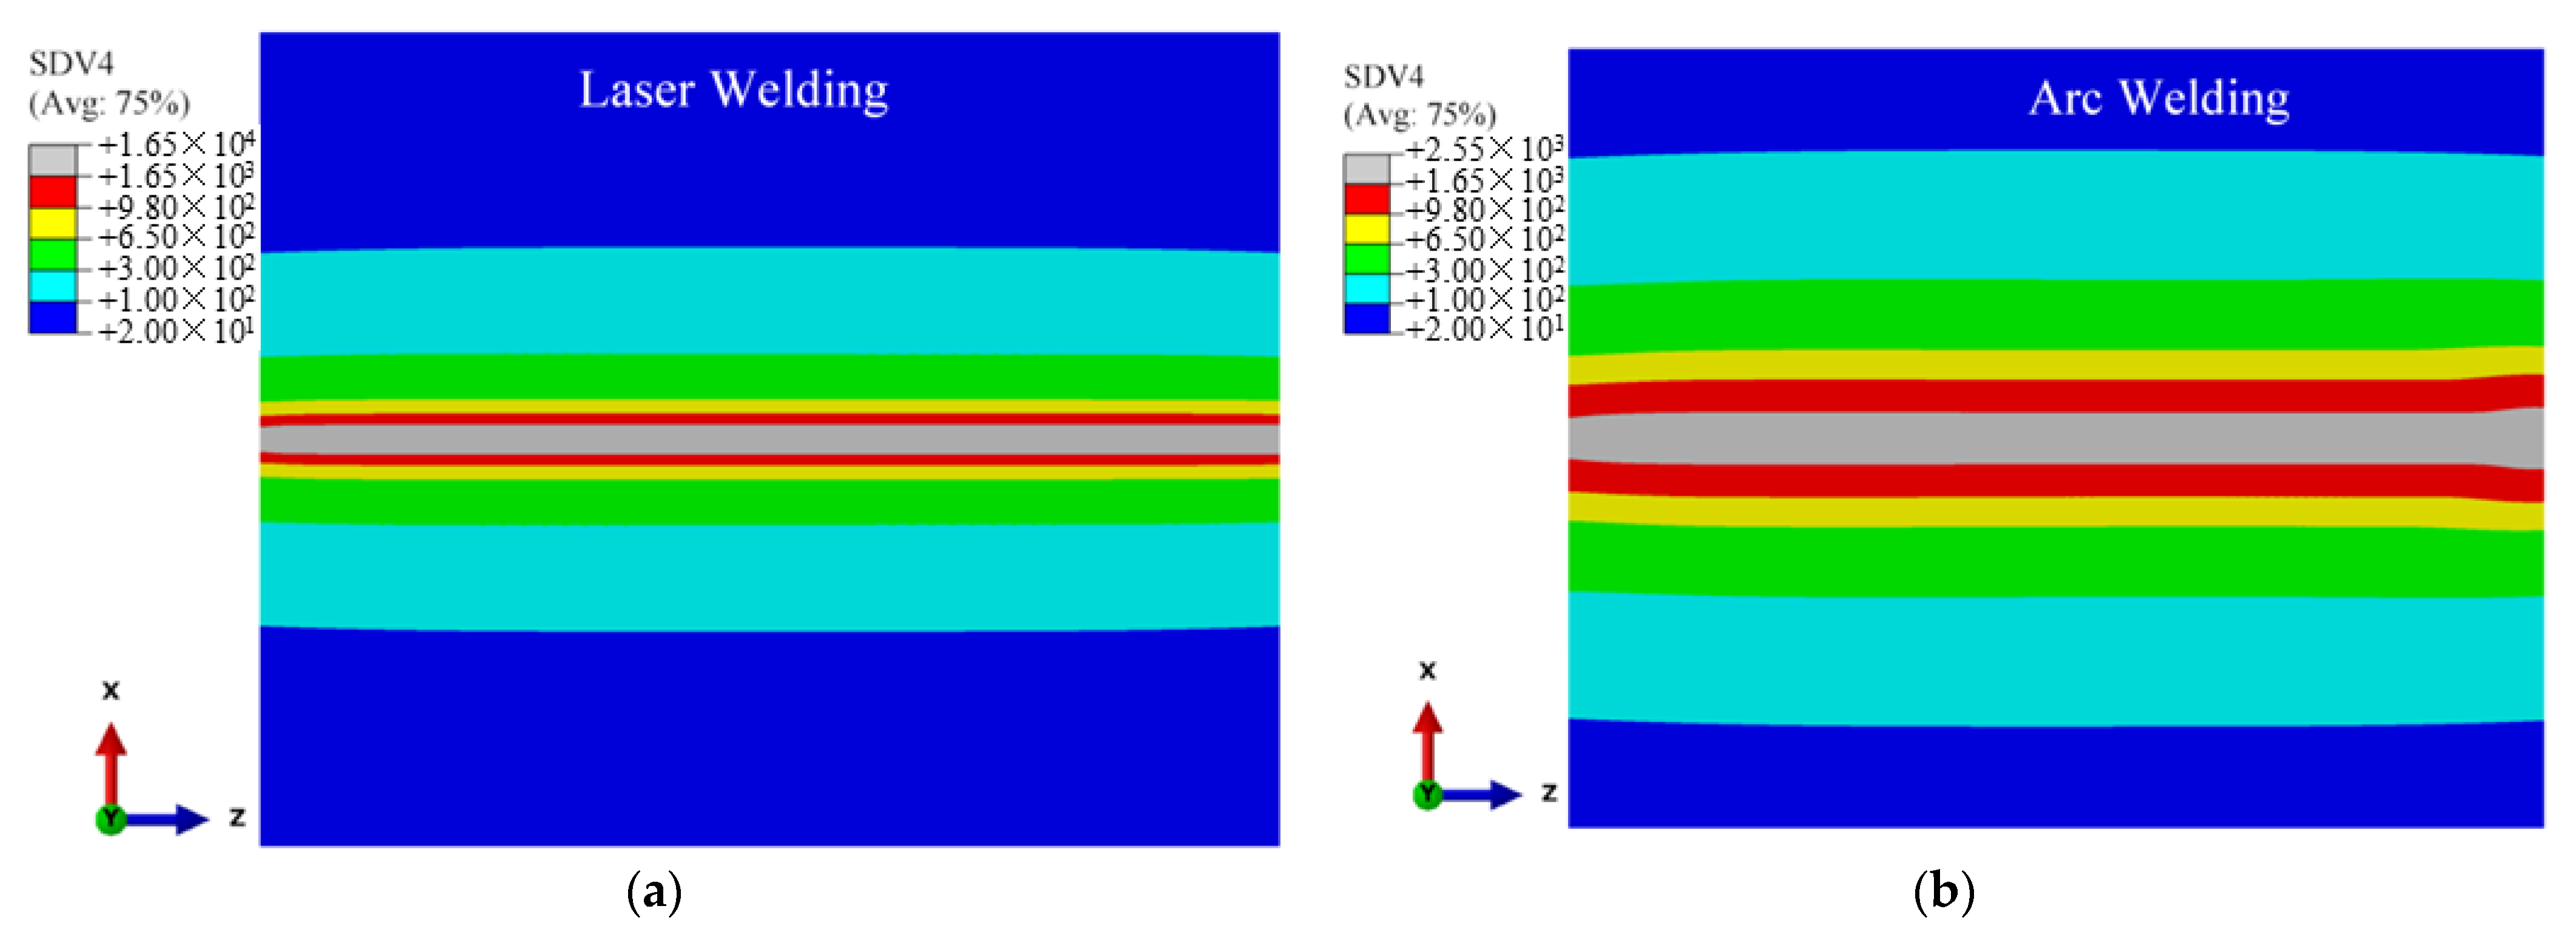 Materials | Free Full-Text | A Numerical Simulation Method Considering Solid Phase Transformation and the Experimental Verification of Ti6Al4V Titanium Alloy Sheet Welding Processes | HTML